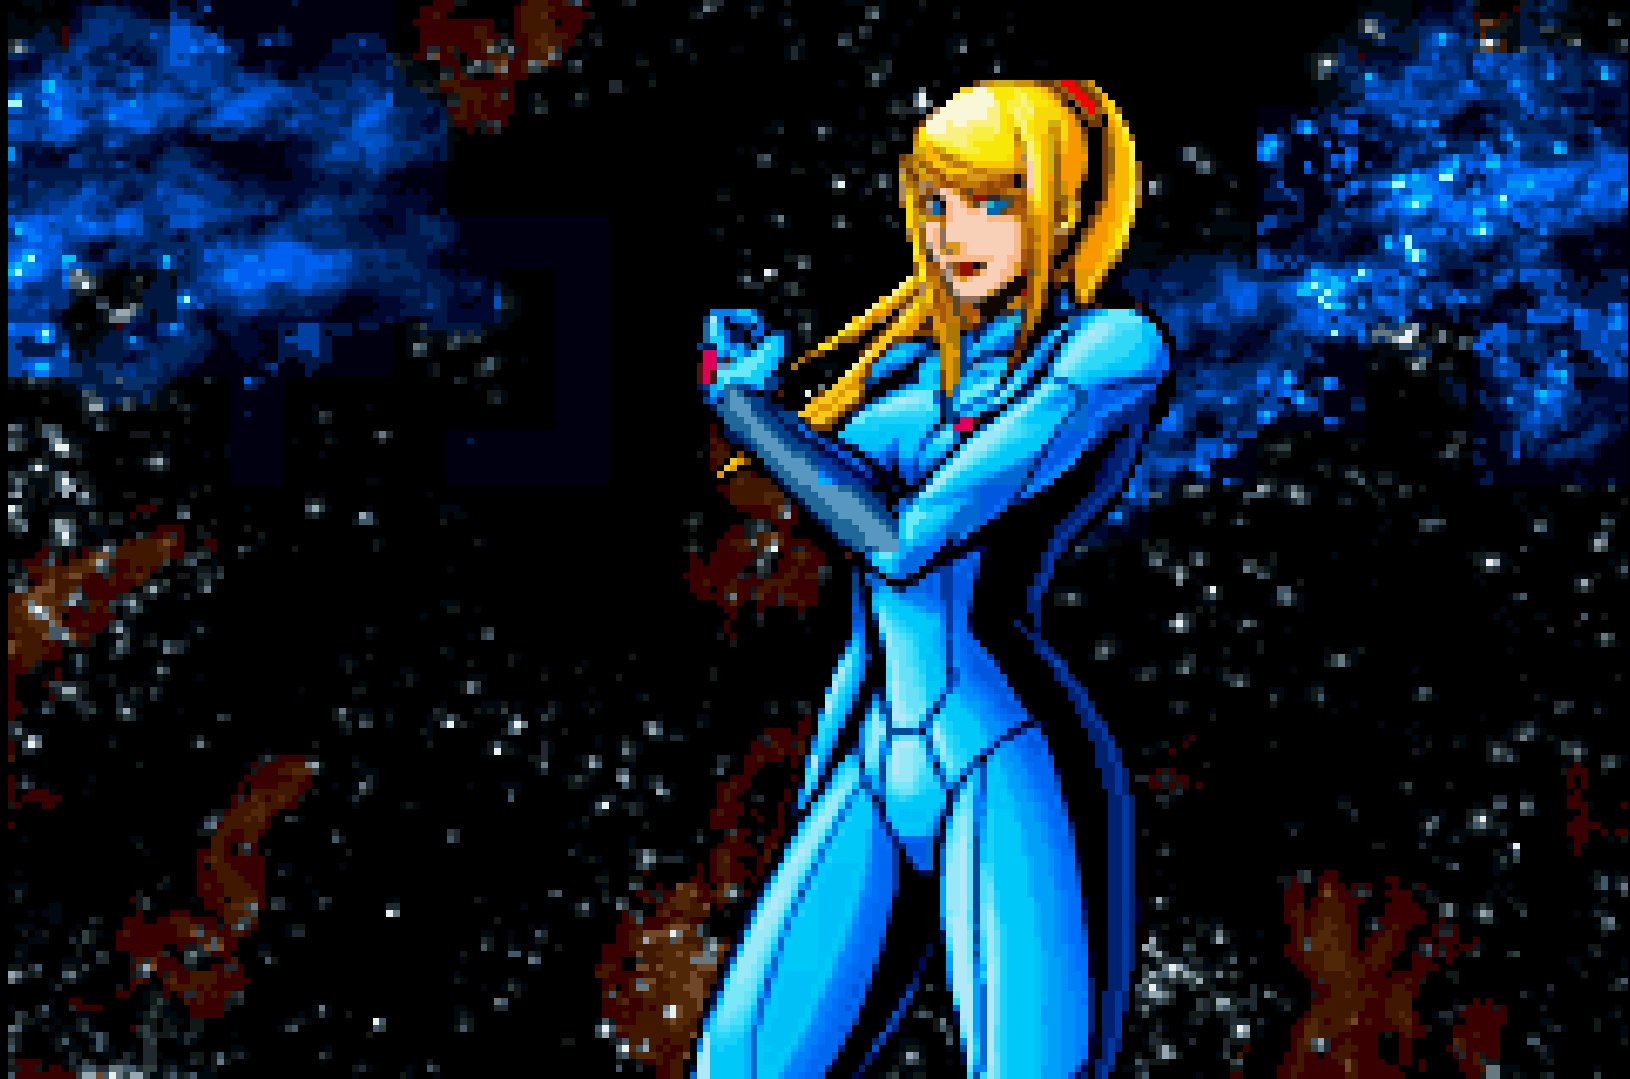 “Also this ZSS sprite is really nice. 